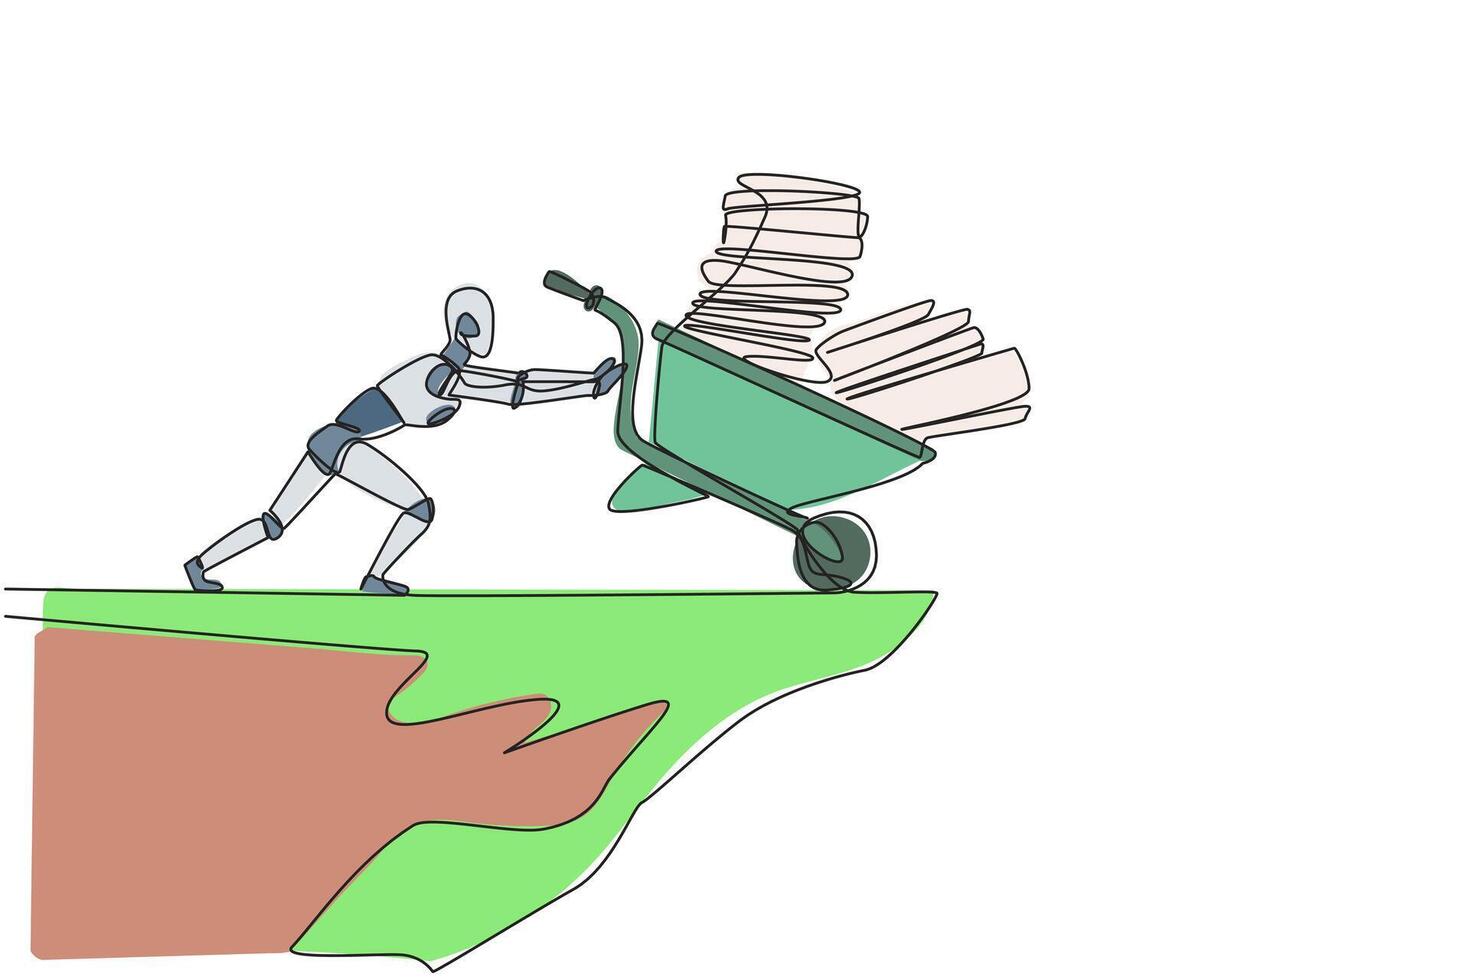 Single continuous line drawing robot pushes a wheelbarrow filled with piles of paper and binders down from the edge of the cliff. Robotic artificial intelligence. One line design vector illustration